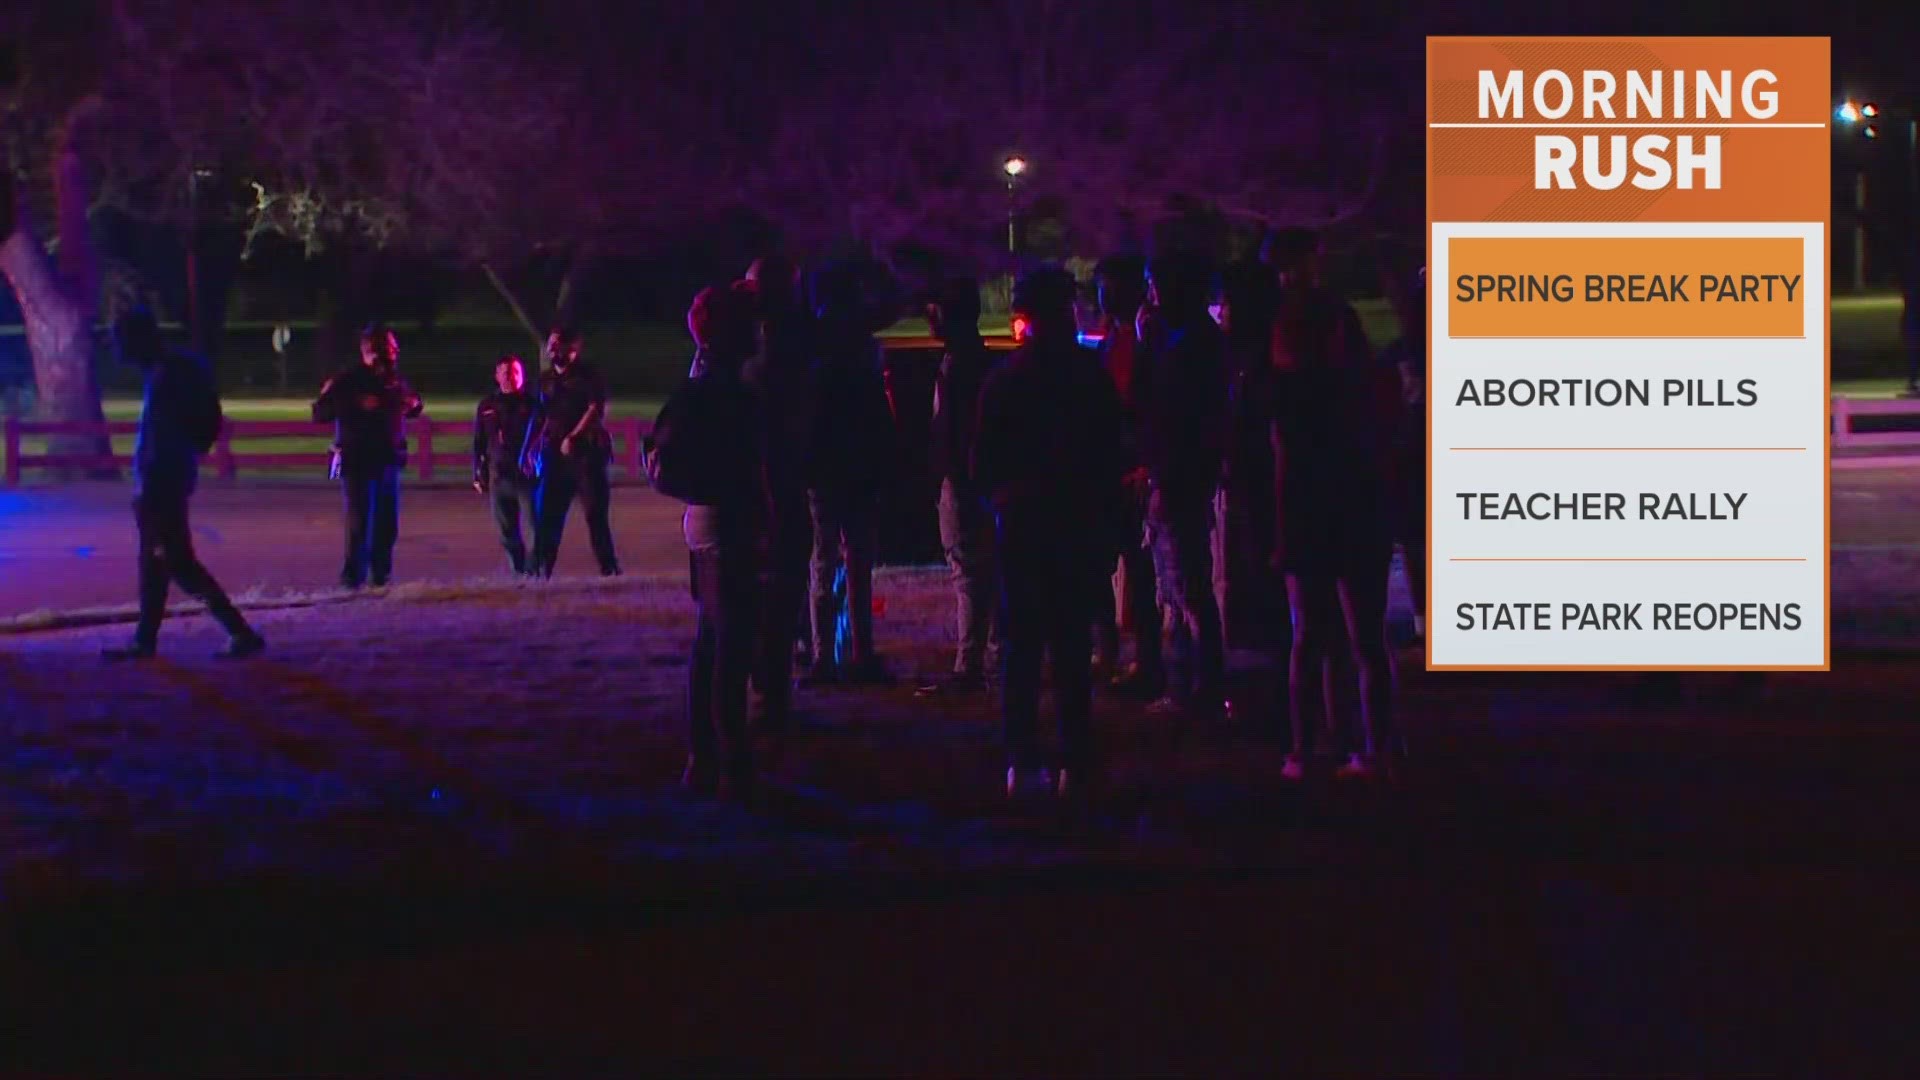 Police said shots were fired as they addressed a large crowd at Katherine Rose Memorial Park.